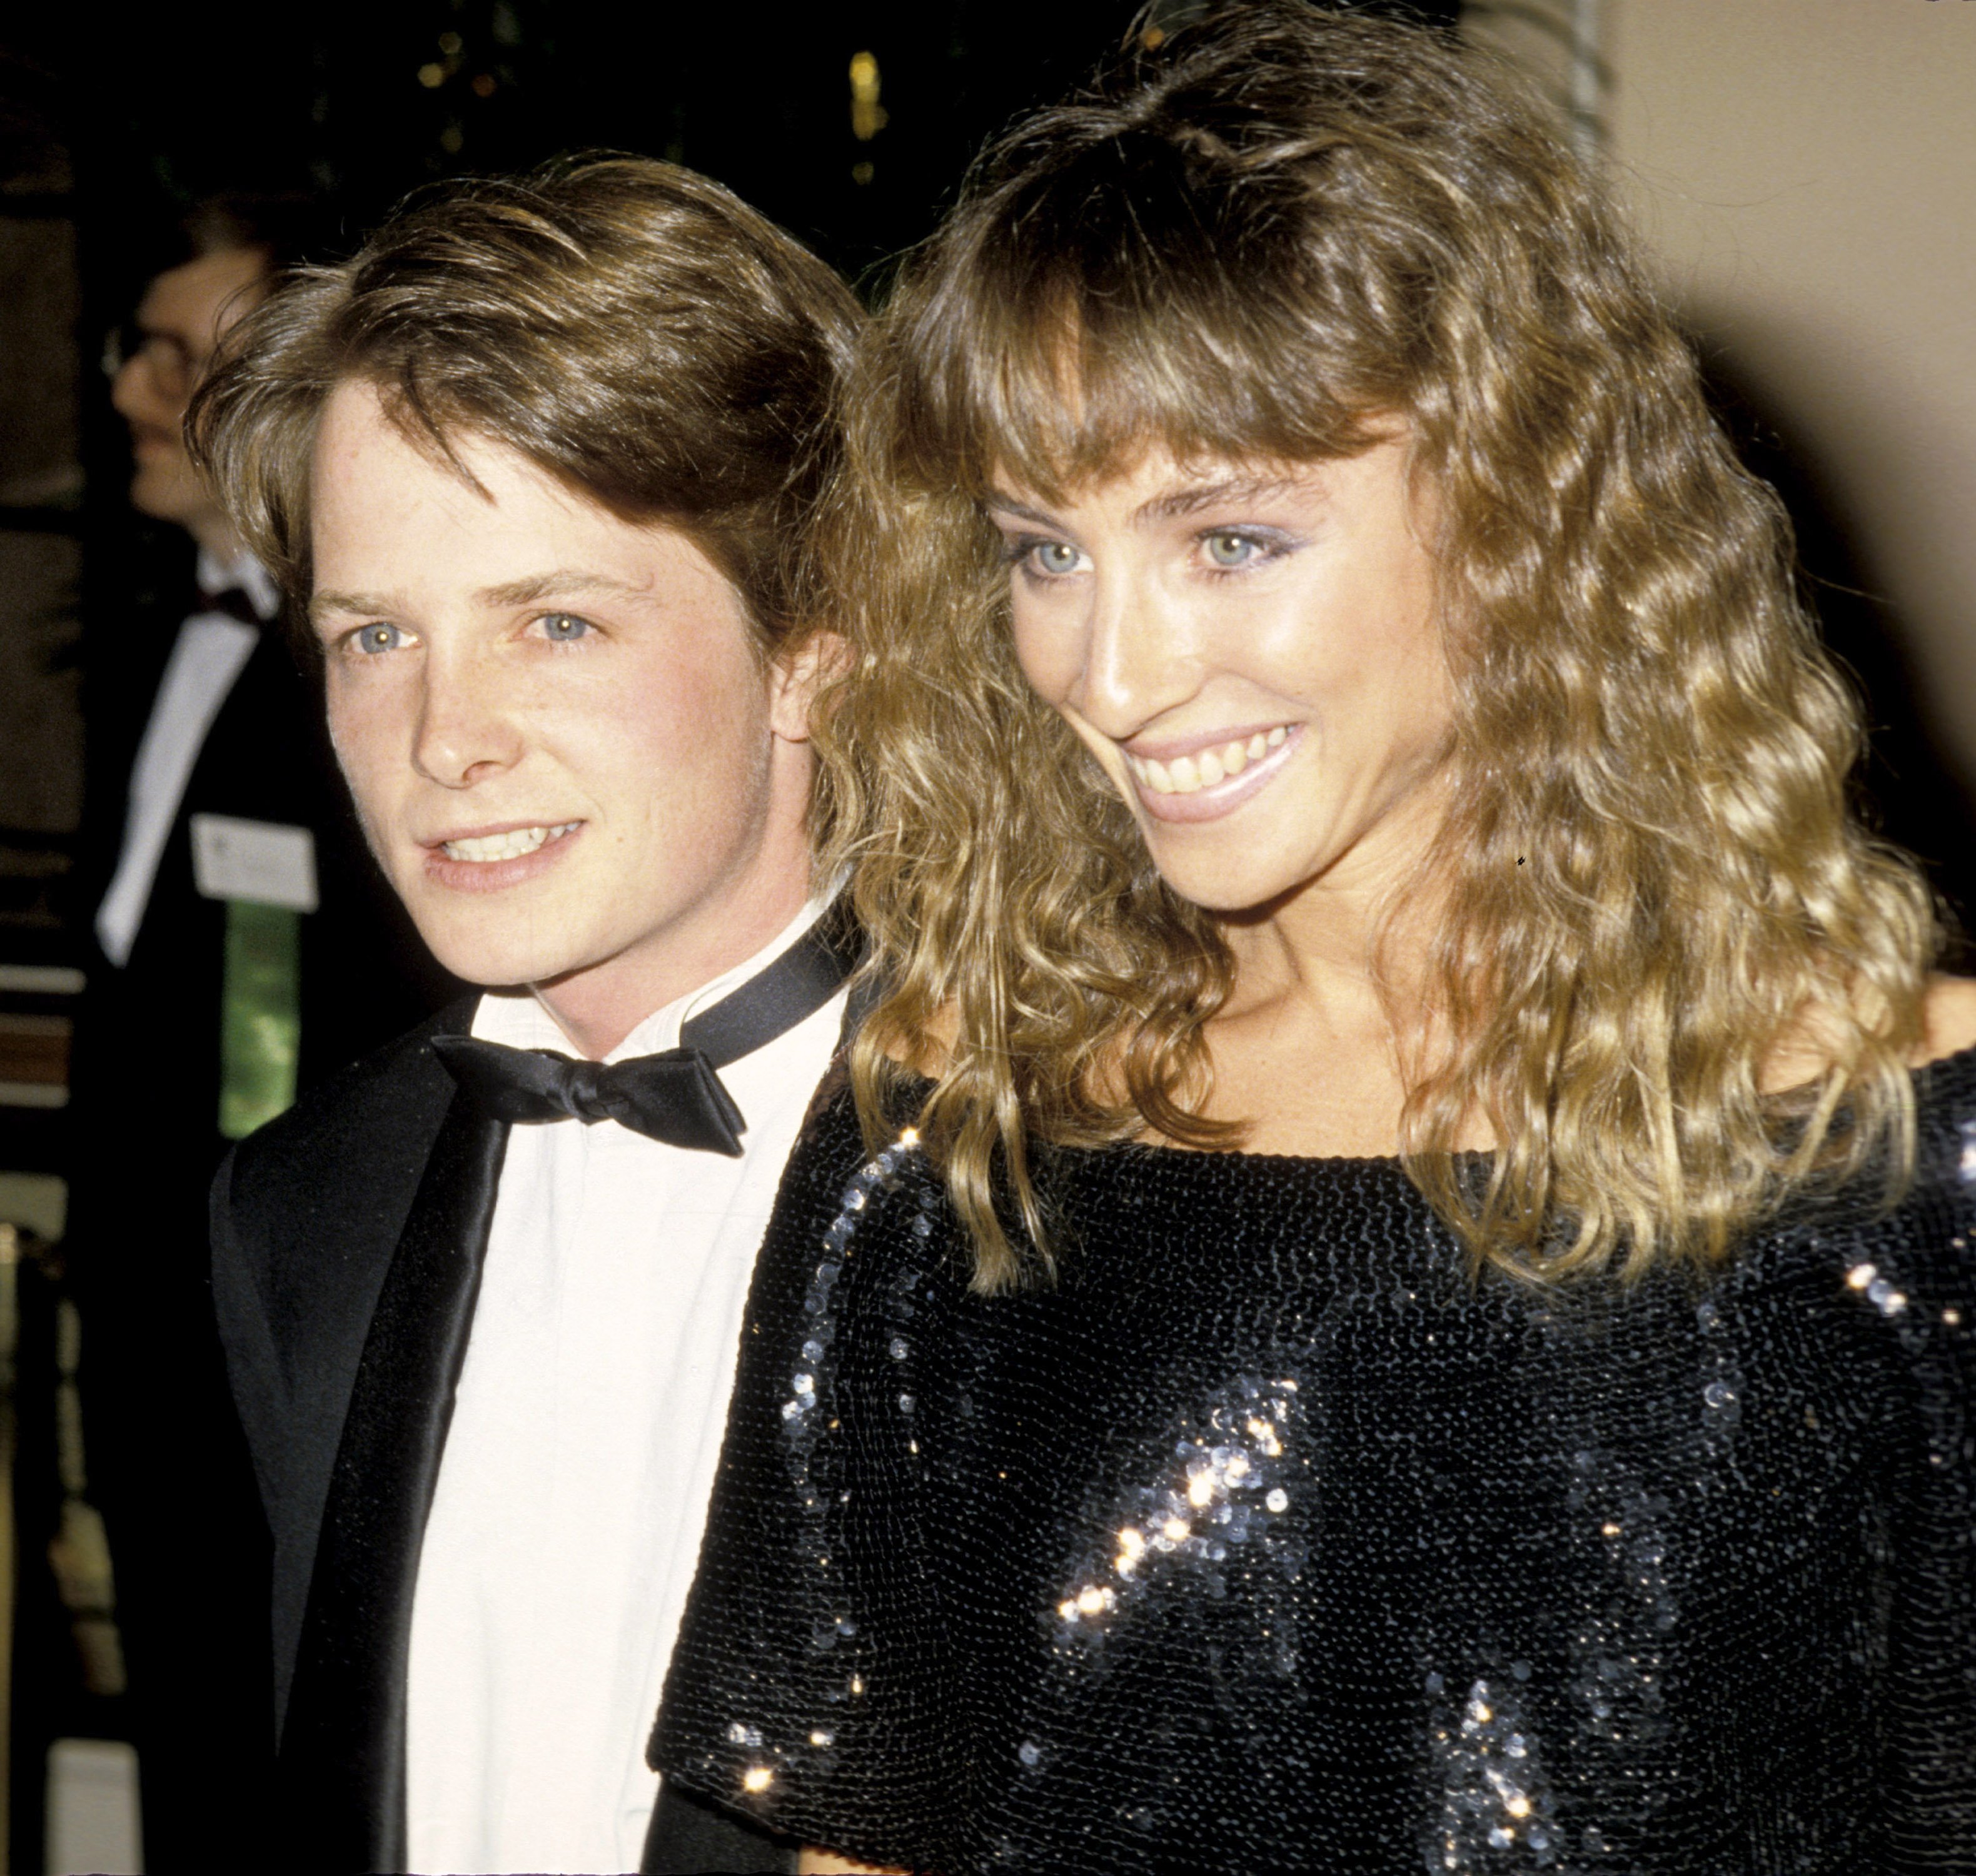 Michael J. Fox and Tracy Pollan pictured at the 43rd Annual Golden Globe Awards. / Source: Getty Images